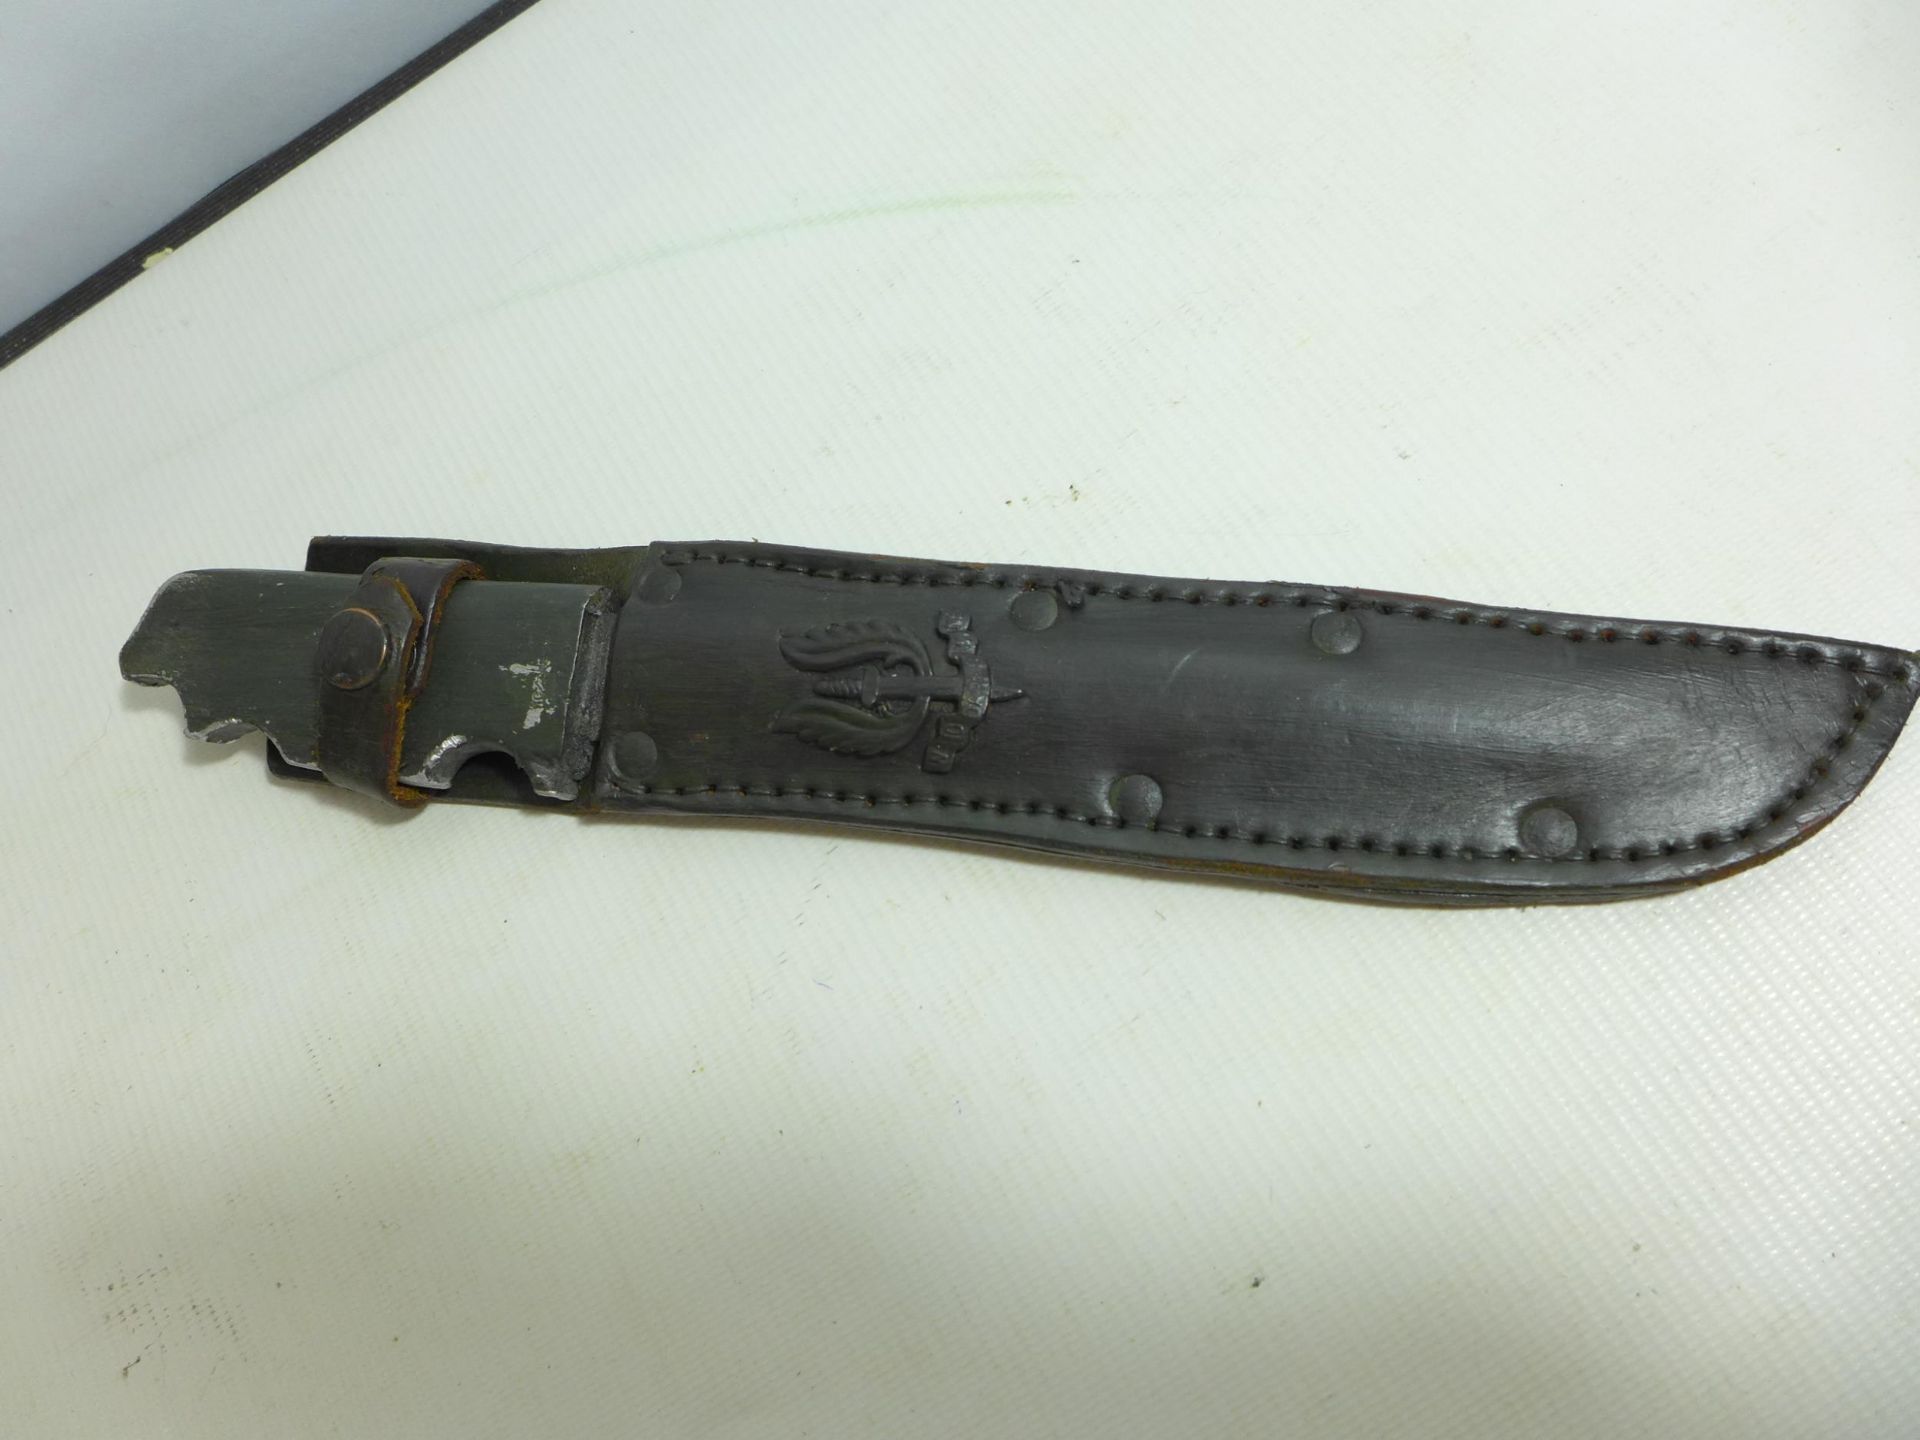 A FIGHTING KNIFE AND SCABBARD 19.5CM, BOWIE BLADE - Image 6 of 7